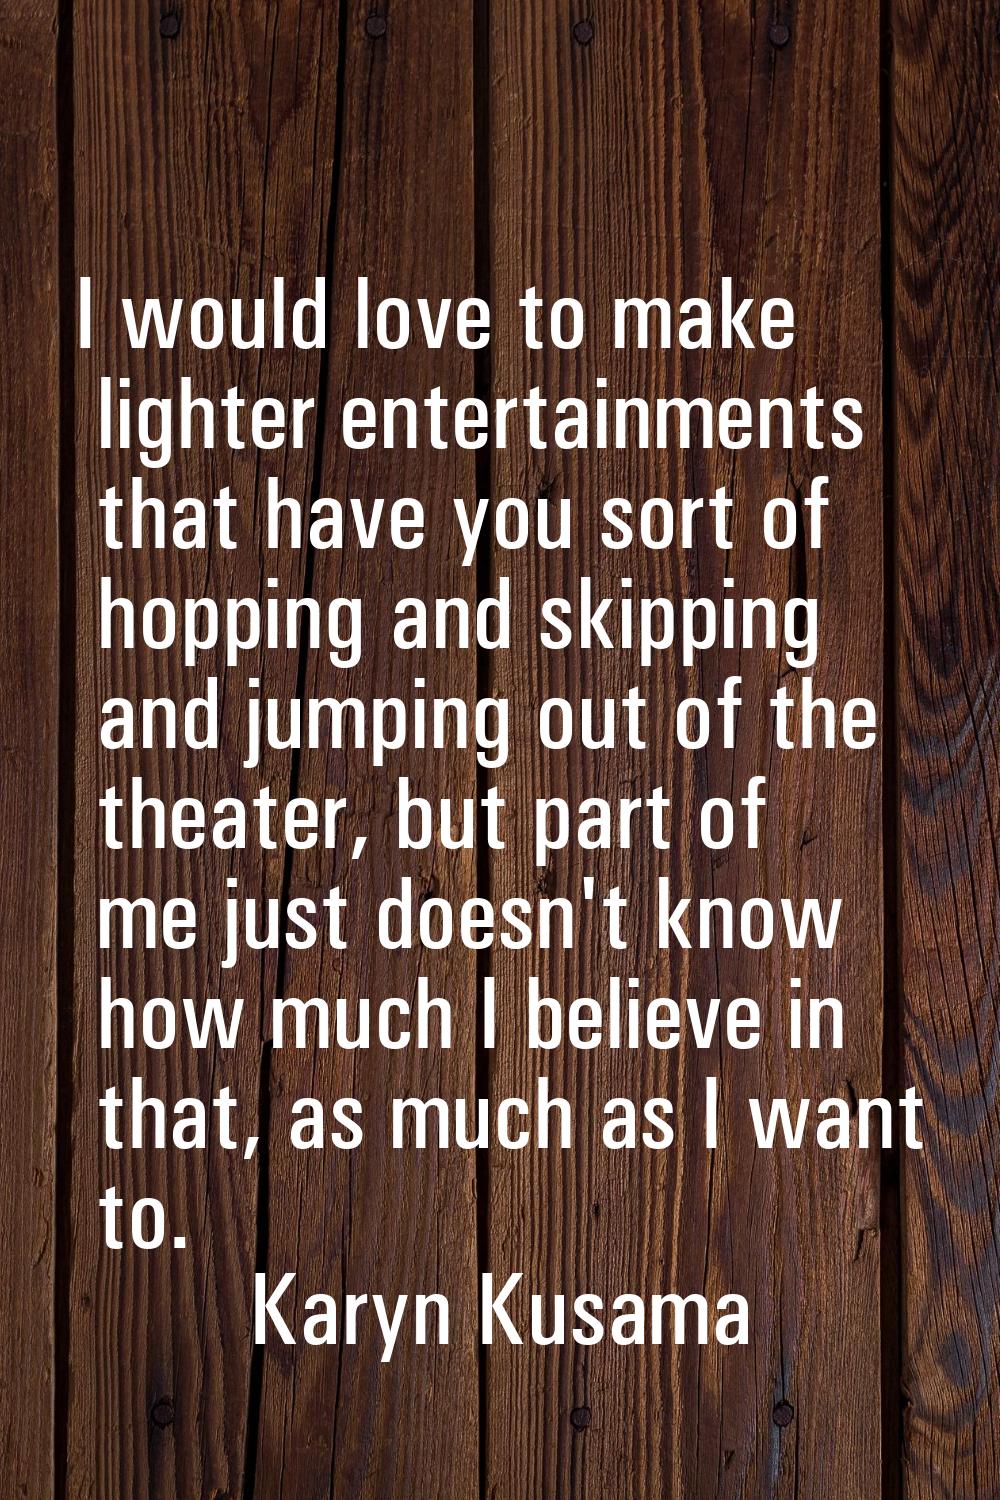 I would love to make lighter entertainments that have you sort of hopping and skipping and jumping 